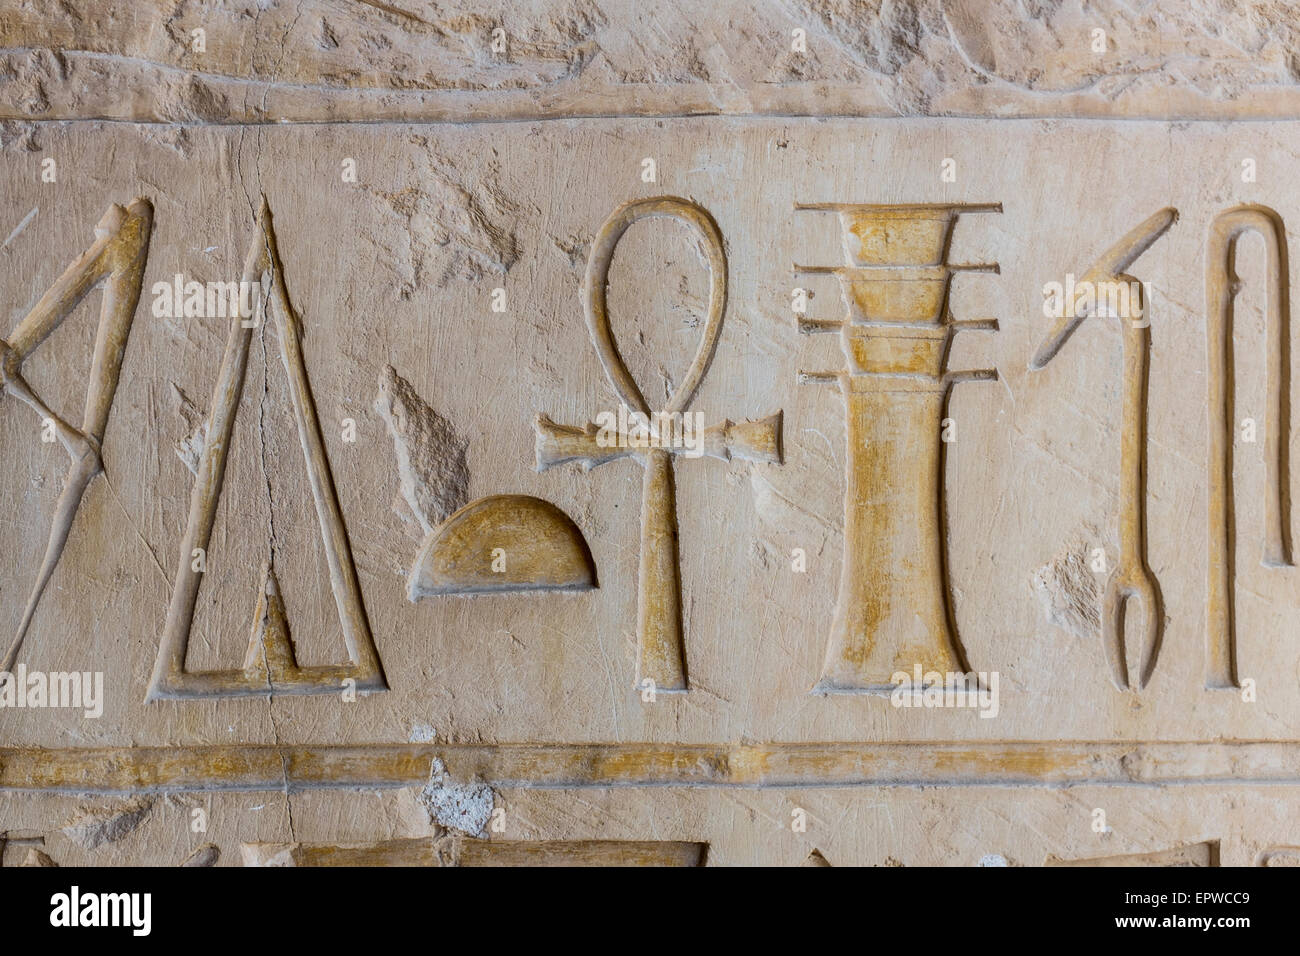 Heiroglyphics depicting the Ankh and Djed pillar, Queen Hatshepsut's temple, Deir el-Bahri, West bank of the Nile, Luxor, Egypt Stock Photo